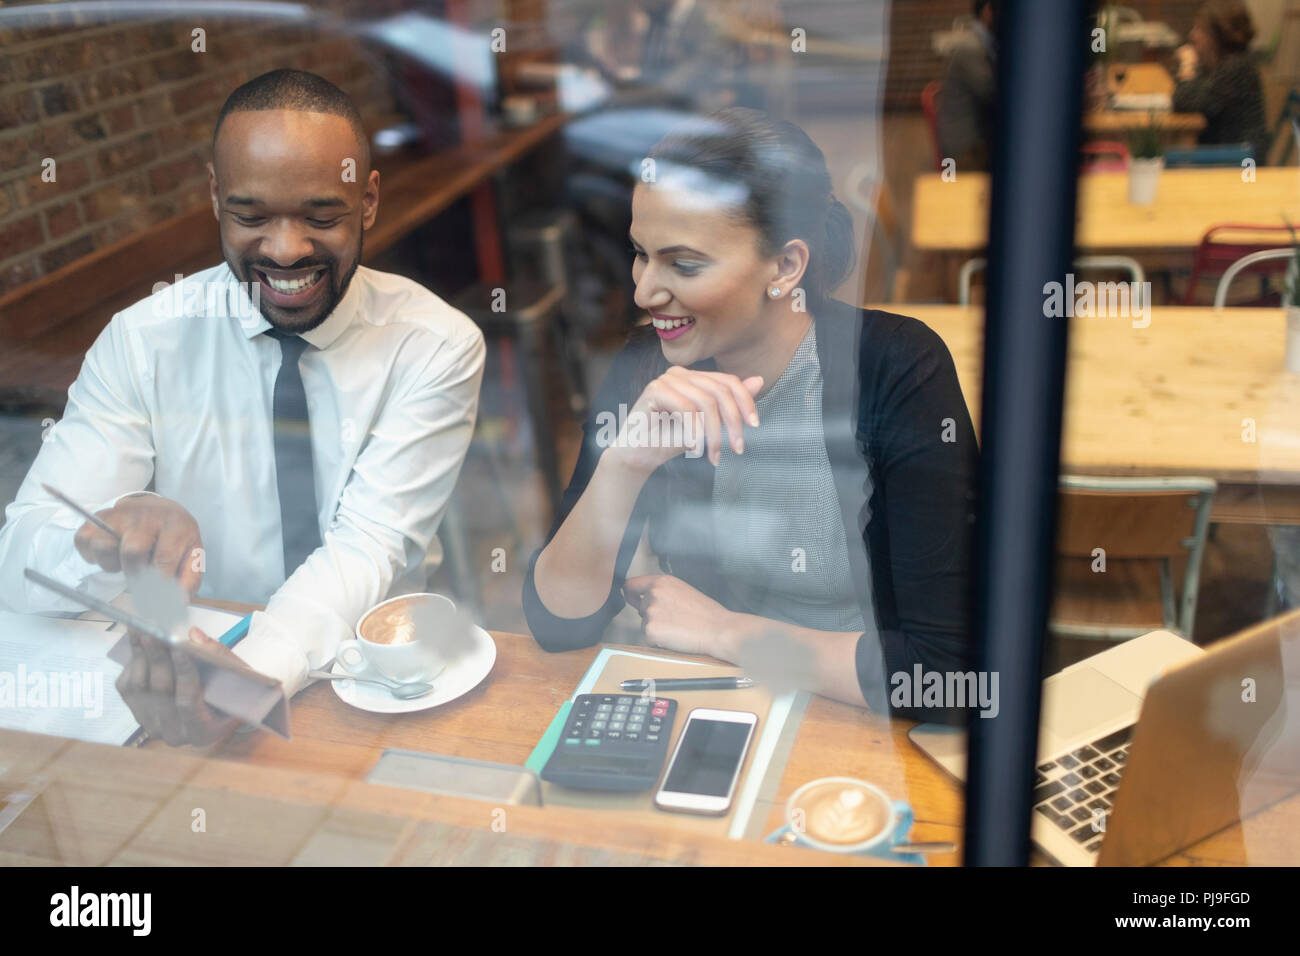 Business people working at cafe window Stock Photo